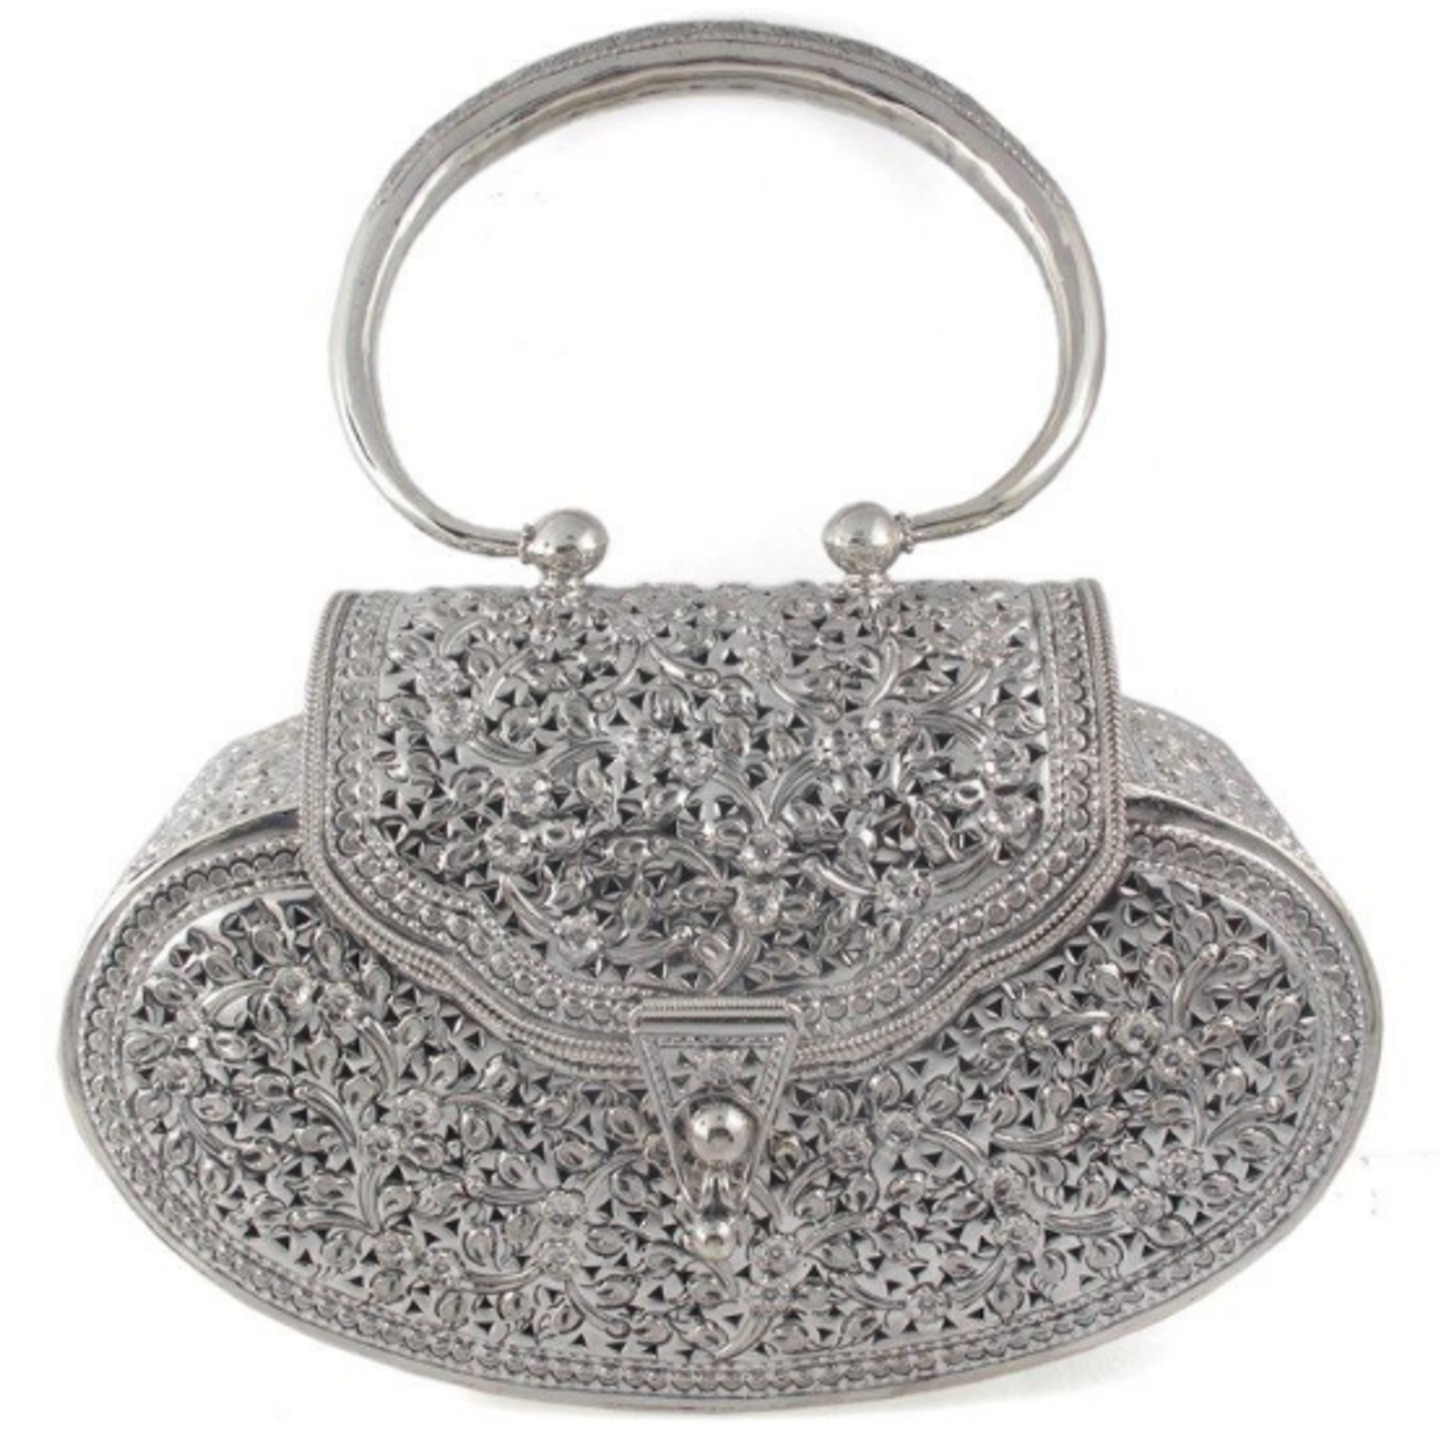 Collectible Floral Engrave Oval Sterling Silver Bag